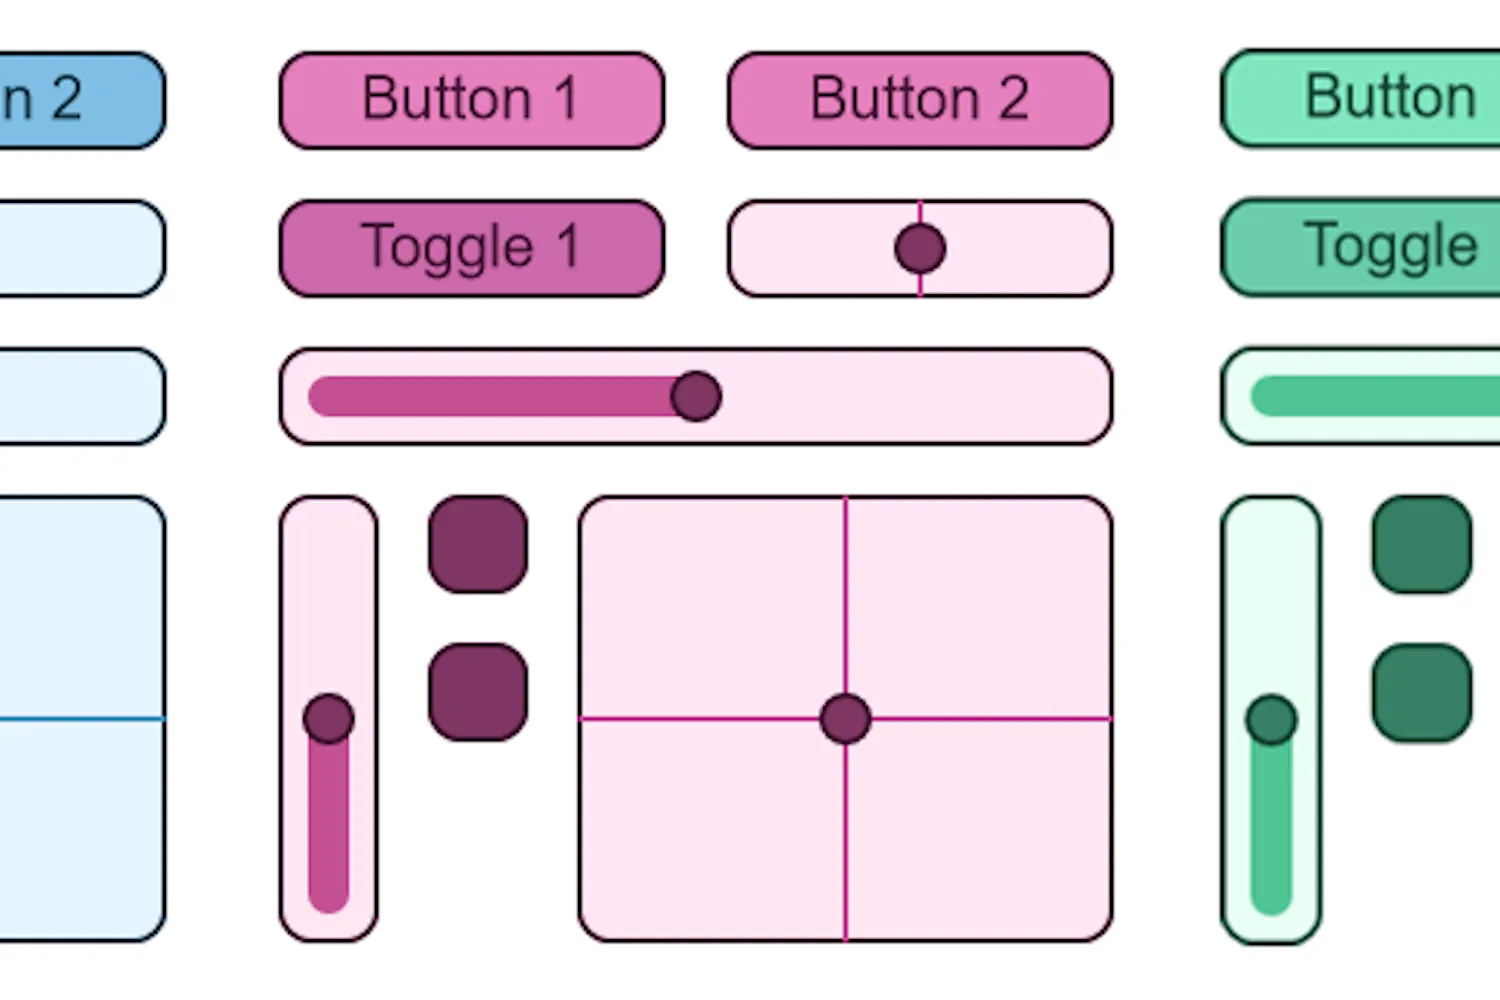 A grid of buttons and sliders created by the library.